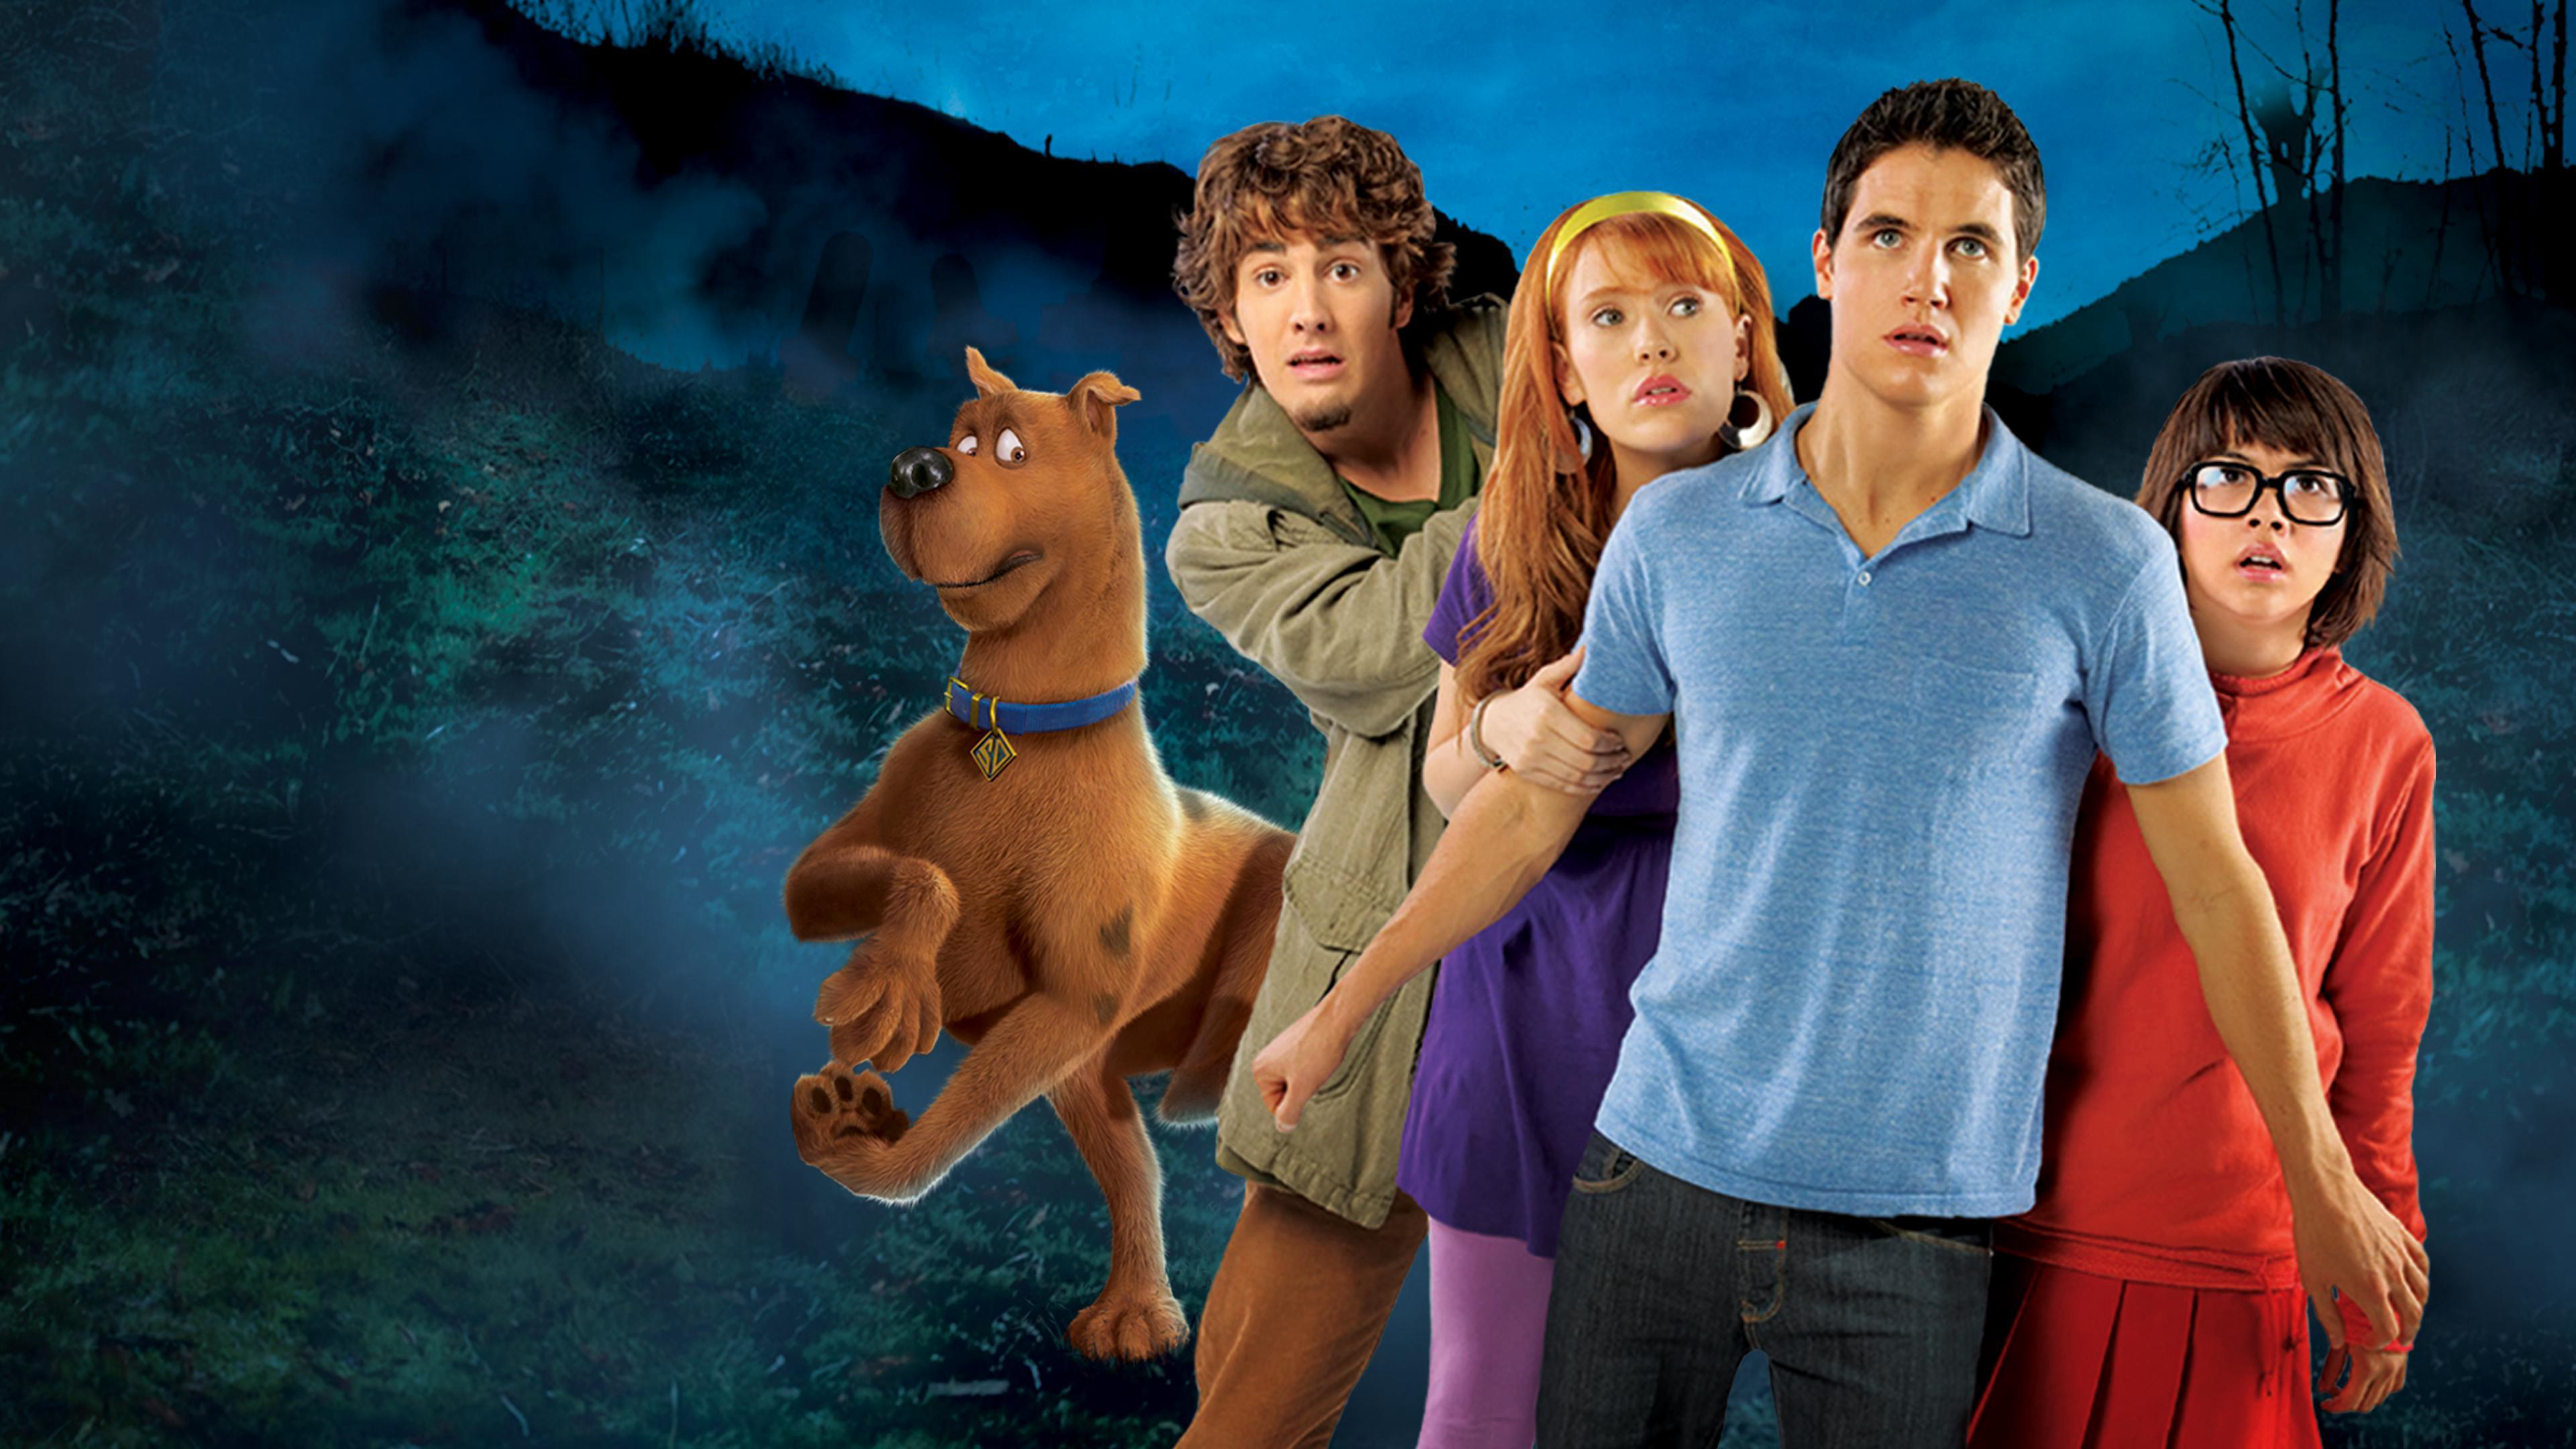 Scooby-Doo! The Mystery Begins / Scooby-Doo! The Mystery Begins (2009)